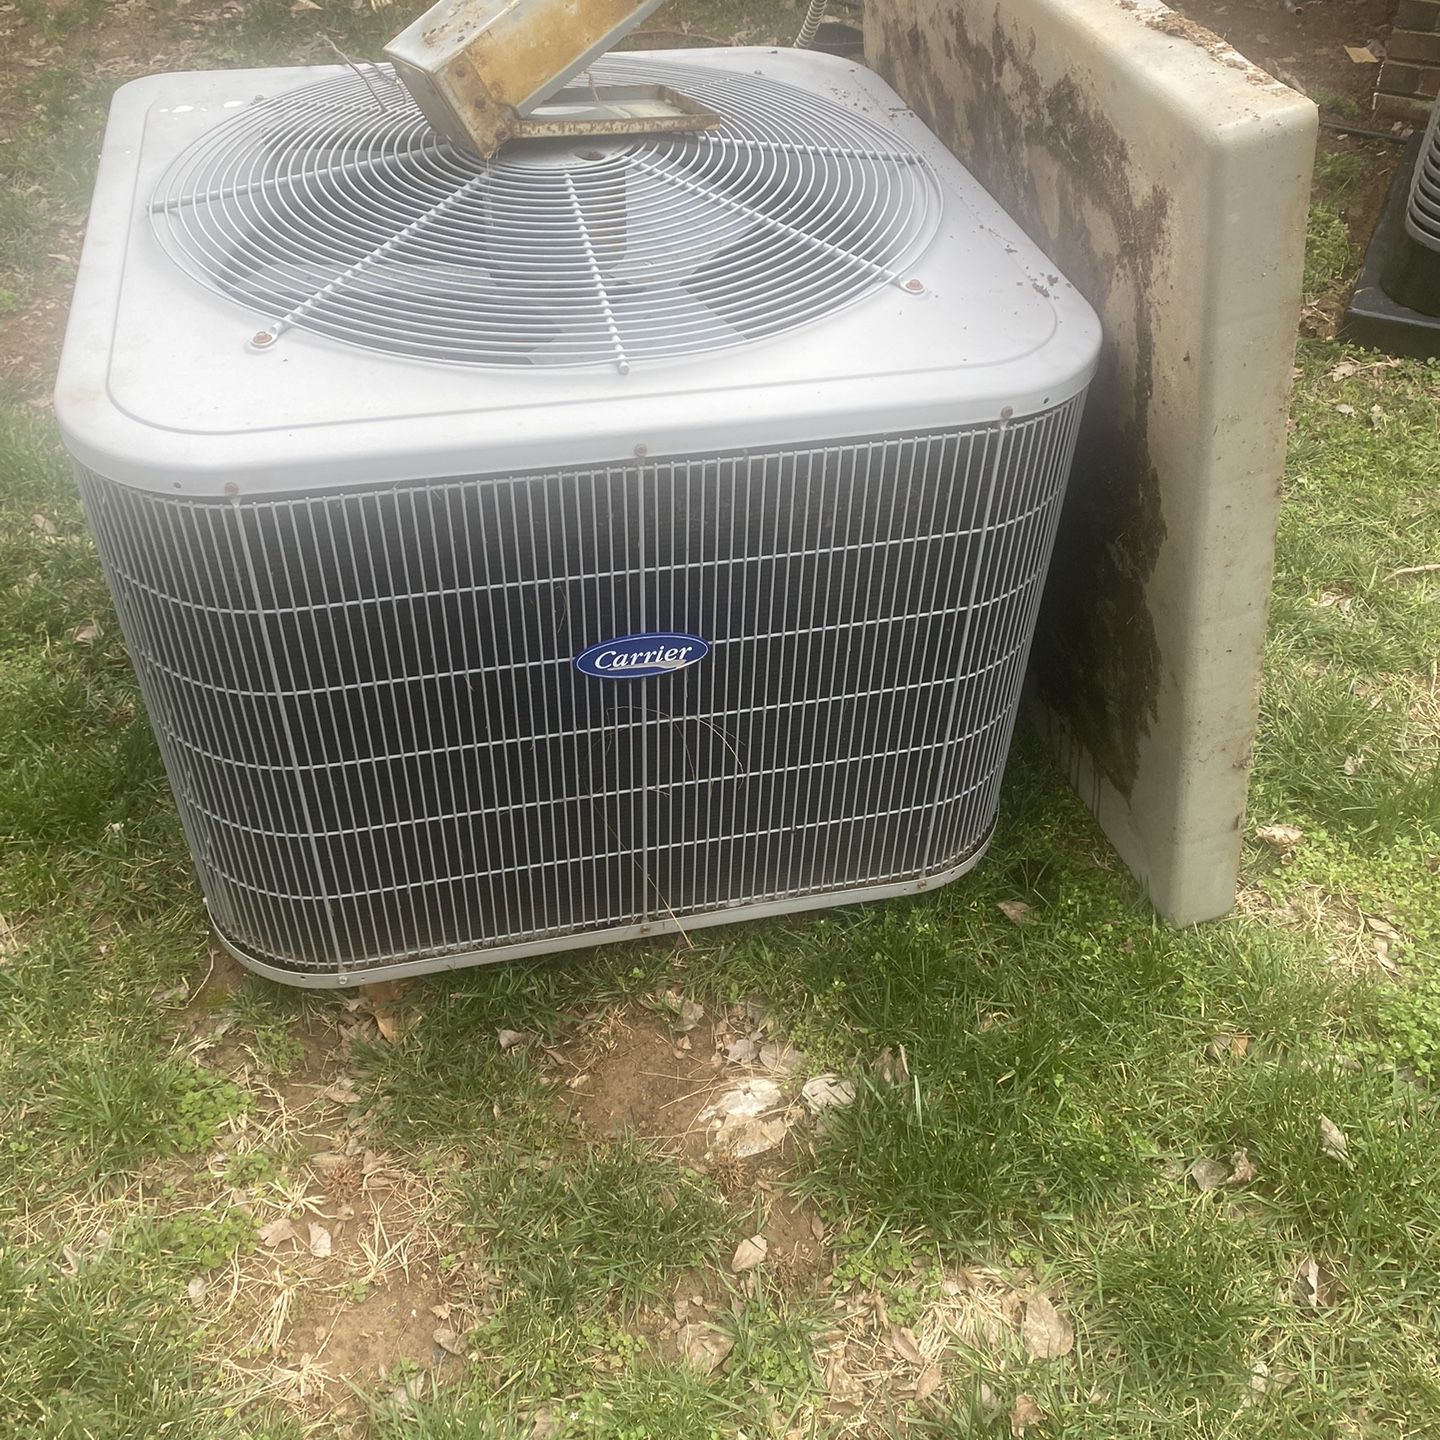 2010 Carrier Central Air Condition ($500.00)